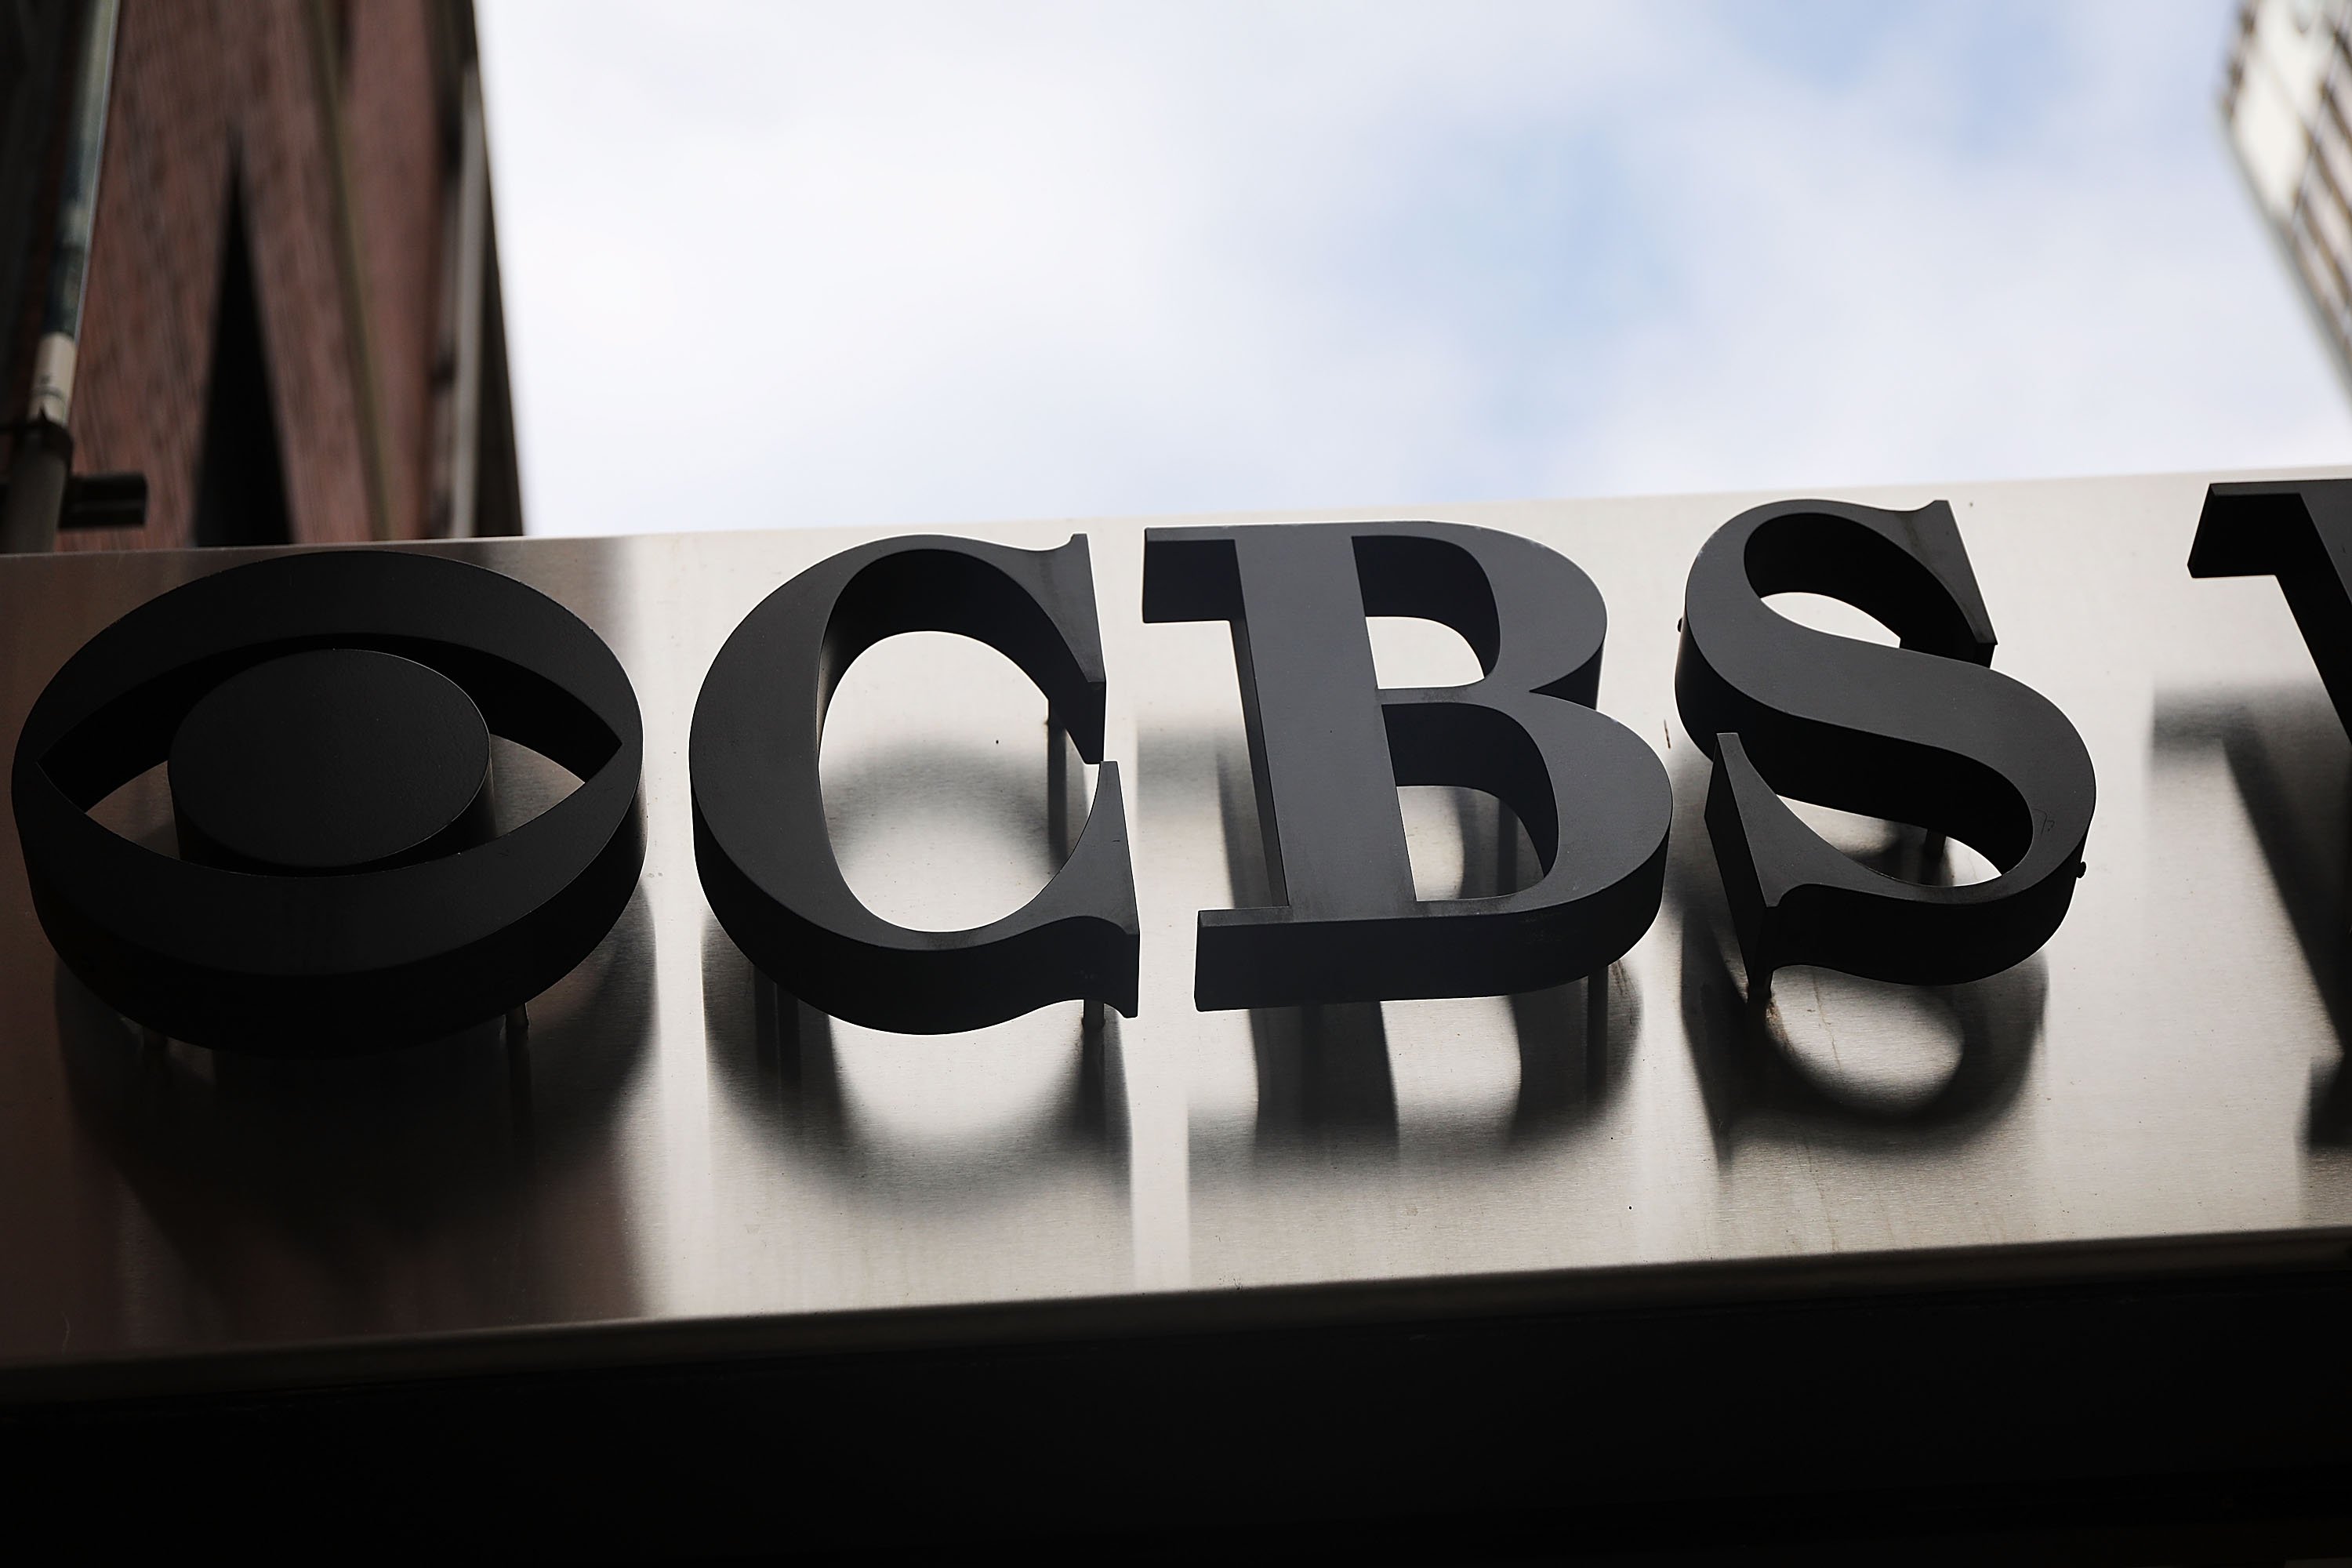 NEW YORK, NY - SEPTEMBER 13: The CBS Broadcast Center stands in Manhattan on September 13, 2018 in New York City. The popular television network has been under scrutiny since allegations of sexual misconduct forced out Jeff Fager, the longtime executive producer of "60 Minutes", and chairman and chief executive of CBS Les Moonves. (Photo by Spencer Platt/Getty Images)